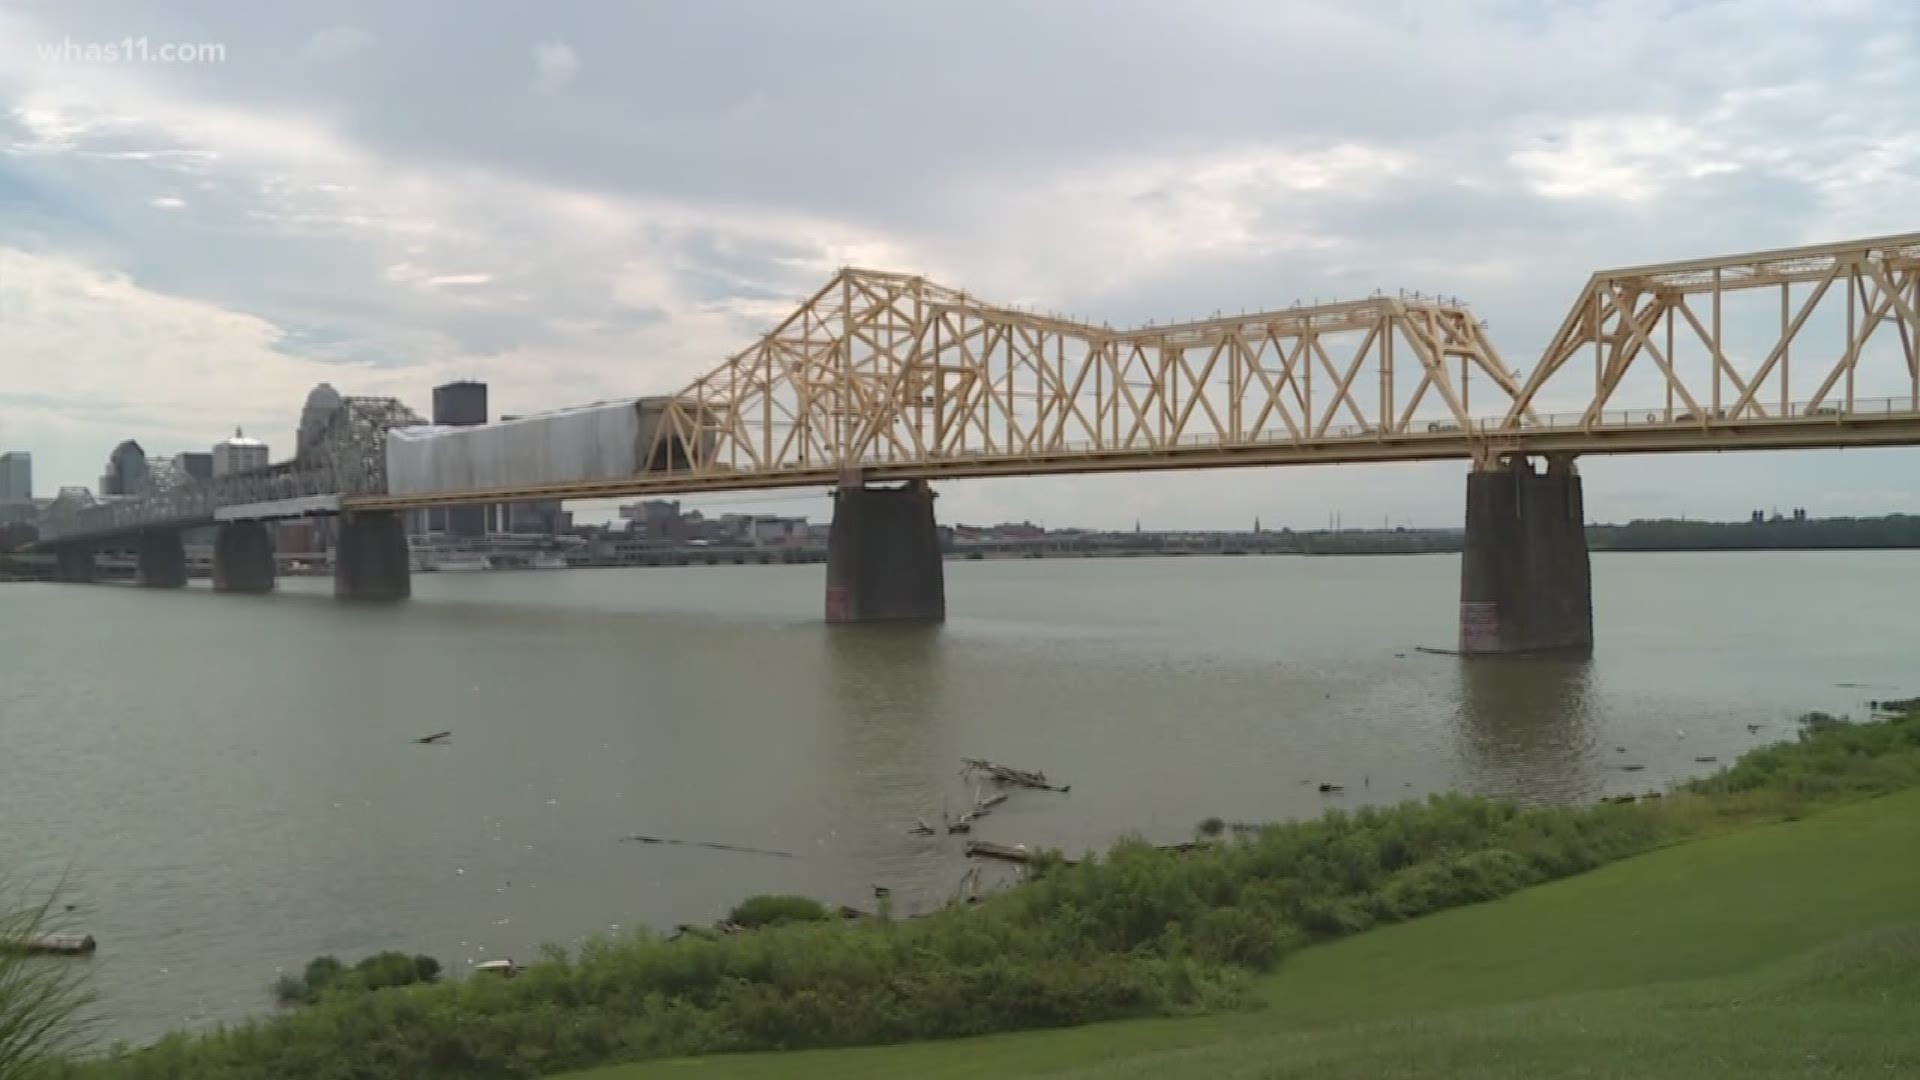 As the weather gets warmer, commuters are starting to wonder when the painting of the 2nd Street Bridge will resume.